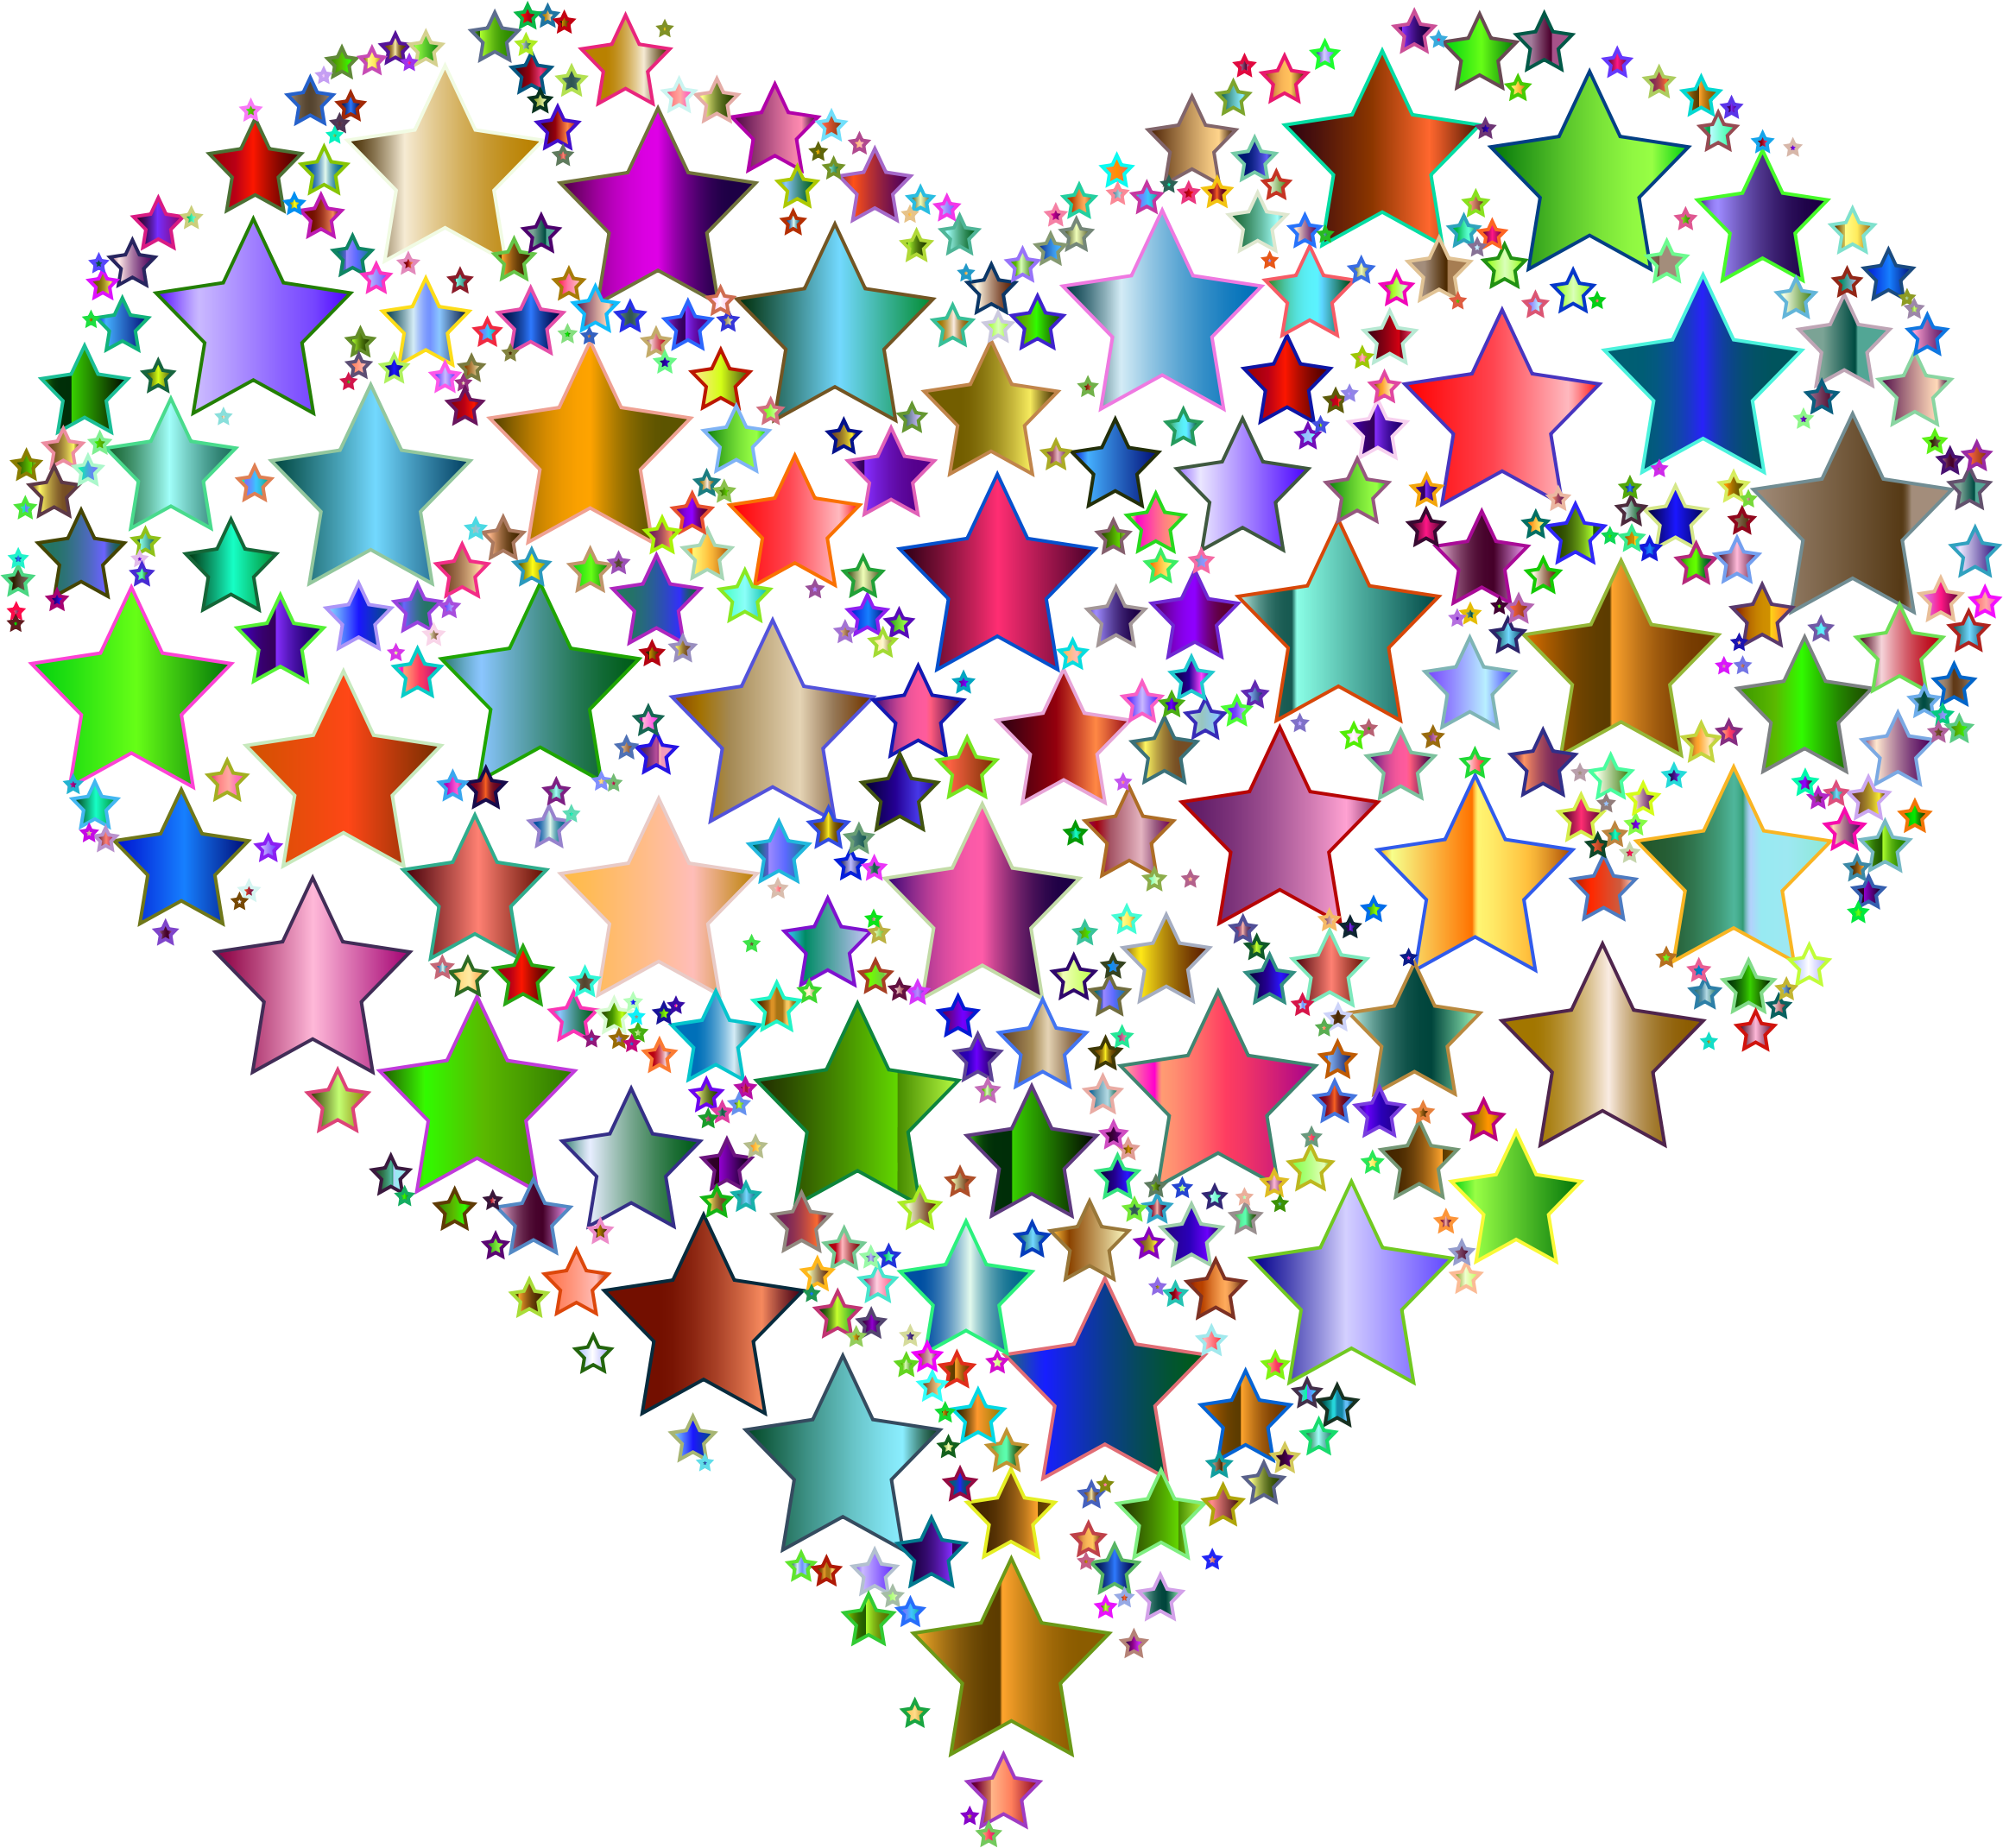 Colorful Heart Shaped Star Cluster